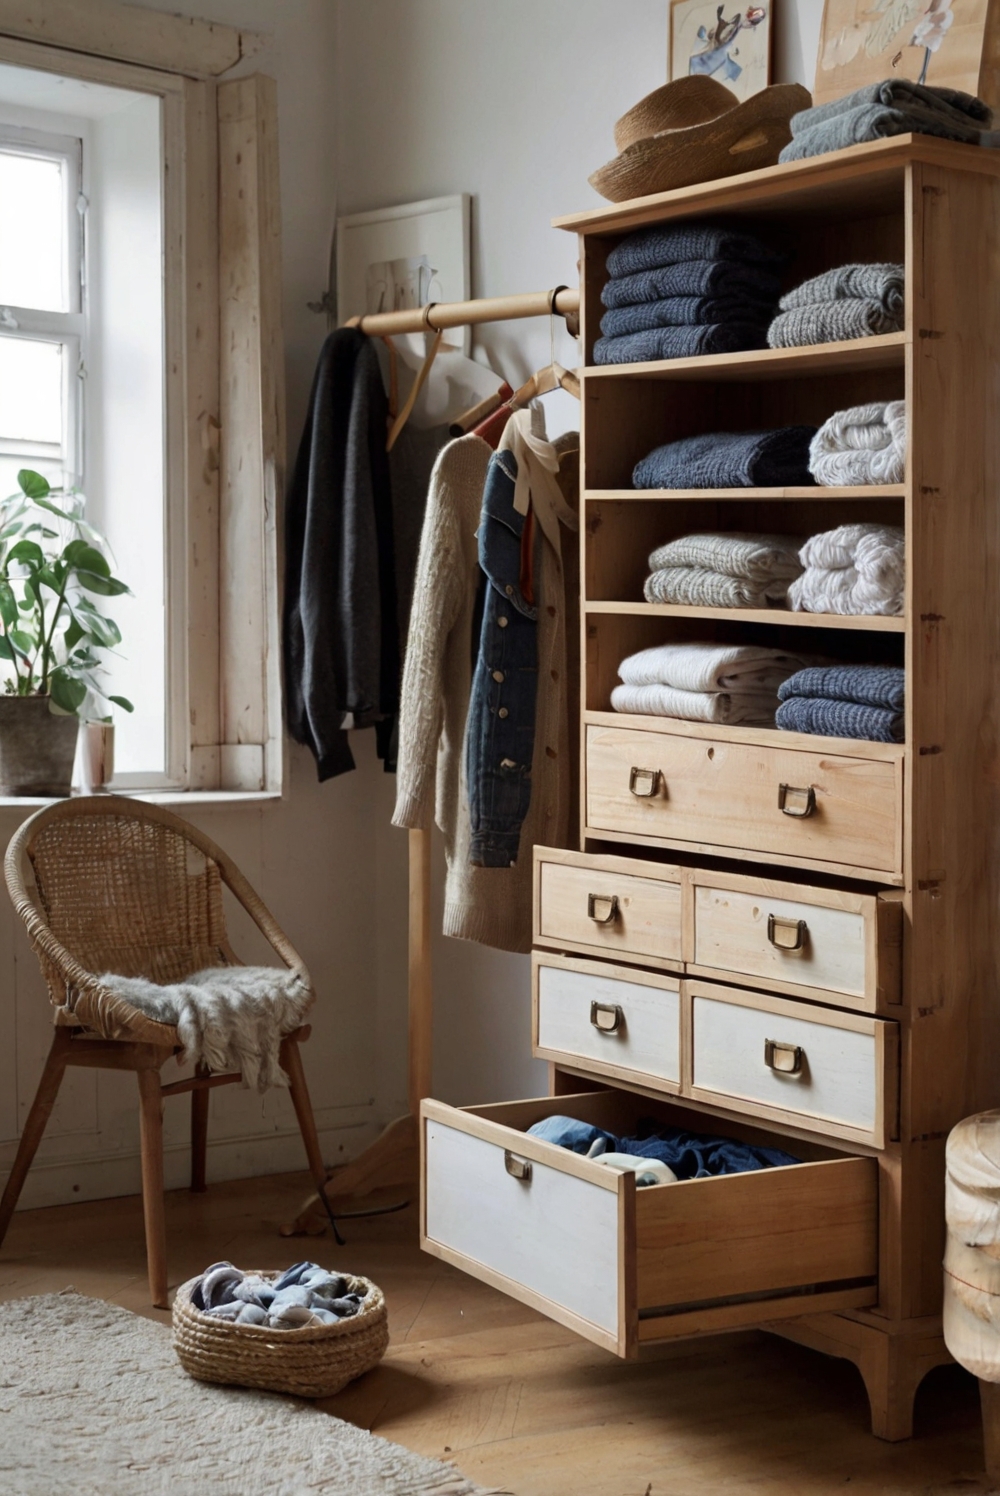 How to effectively utilize a dresser or chest of drawers for clothing storage?